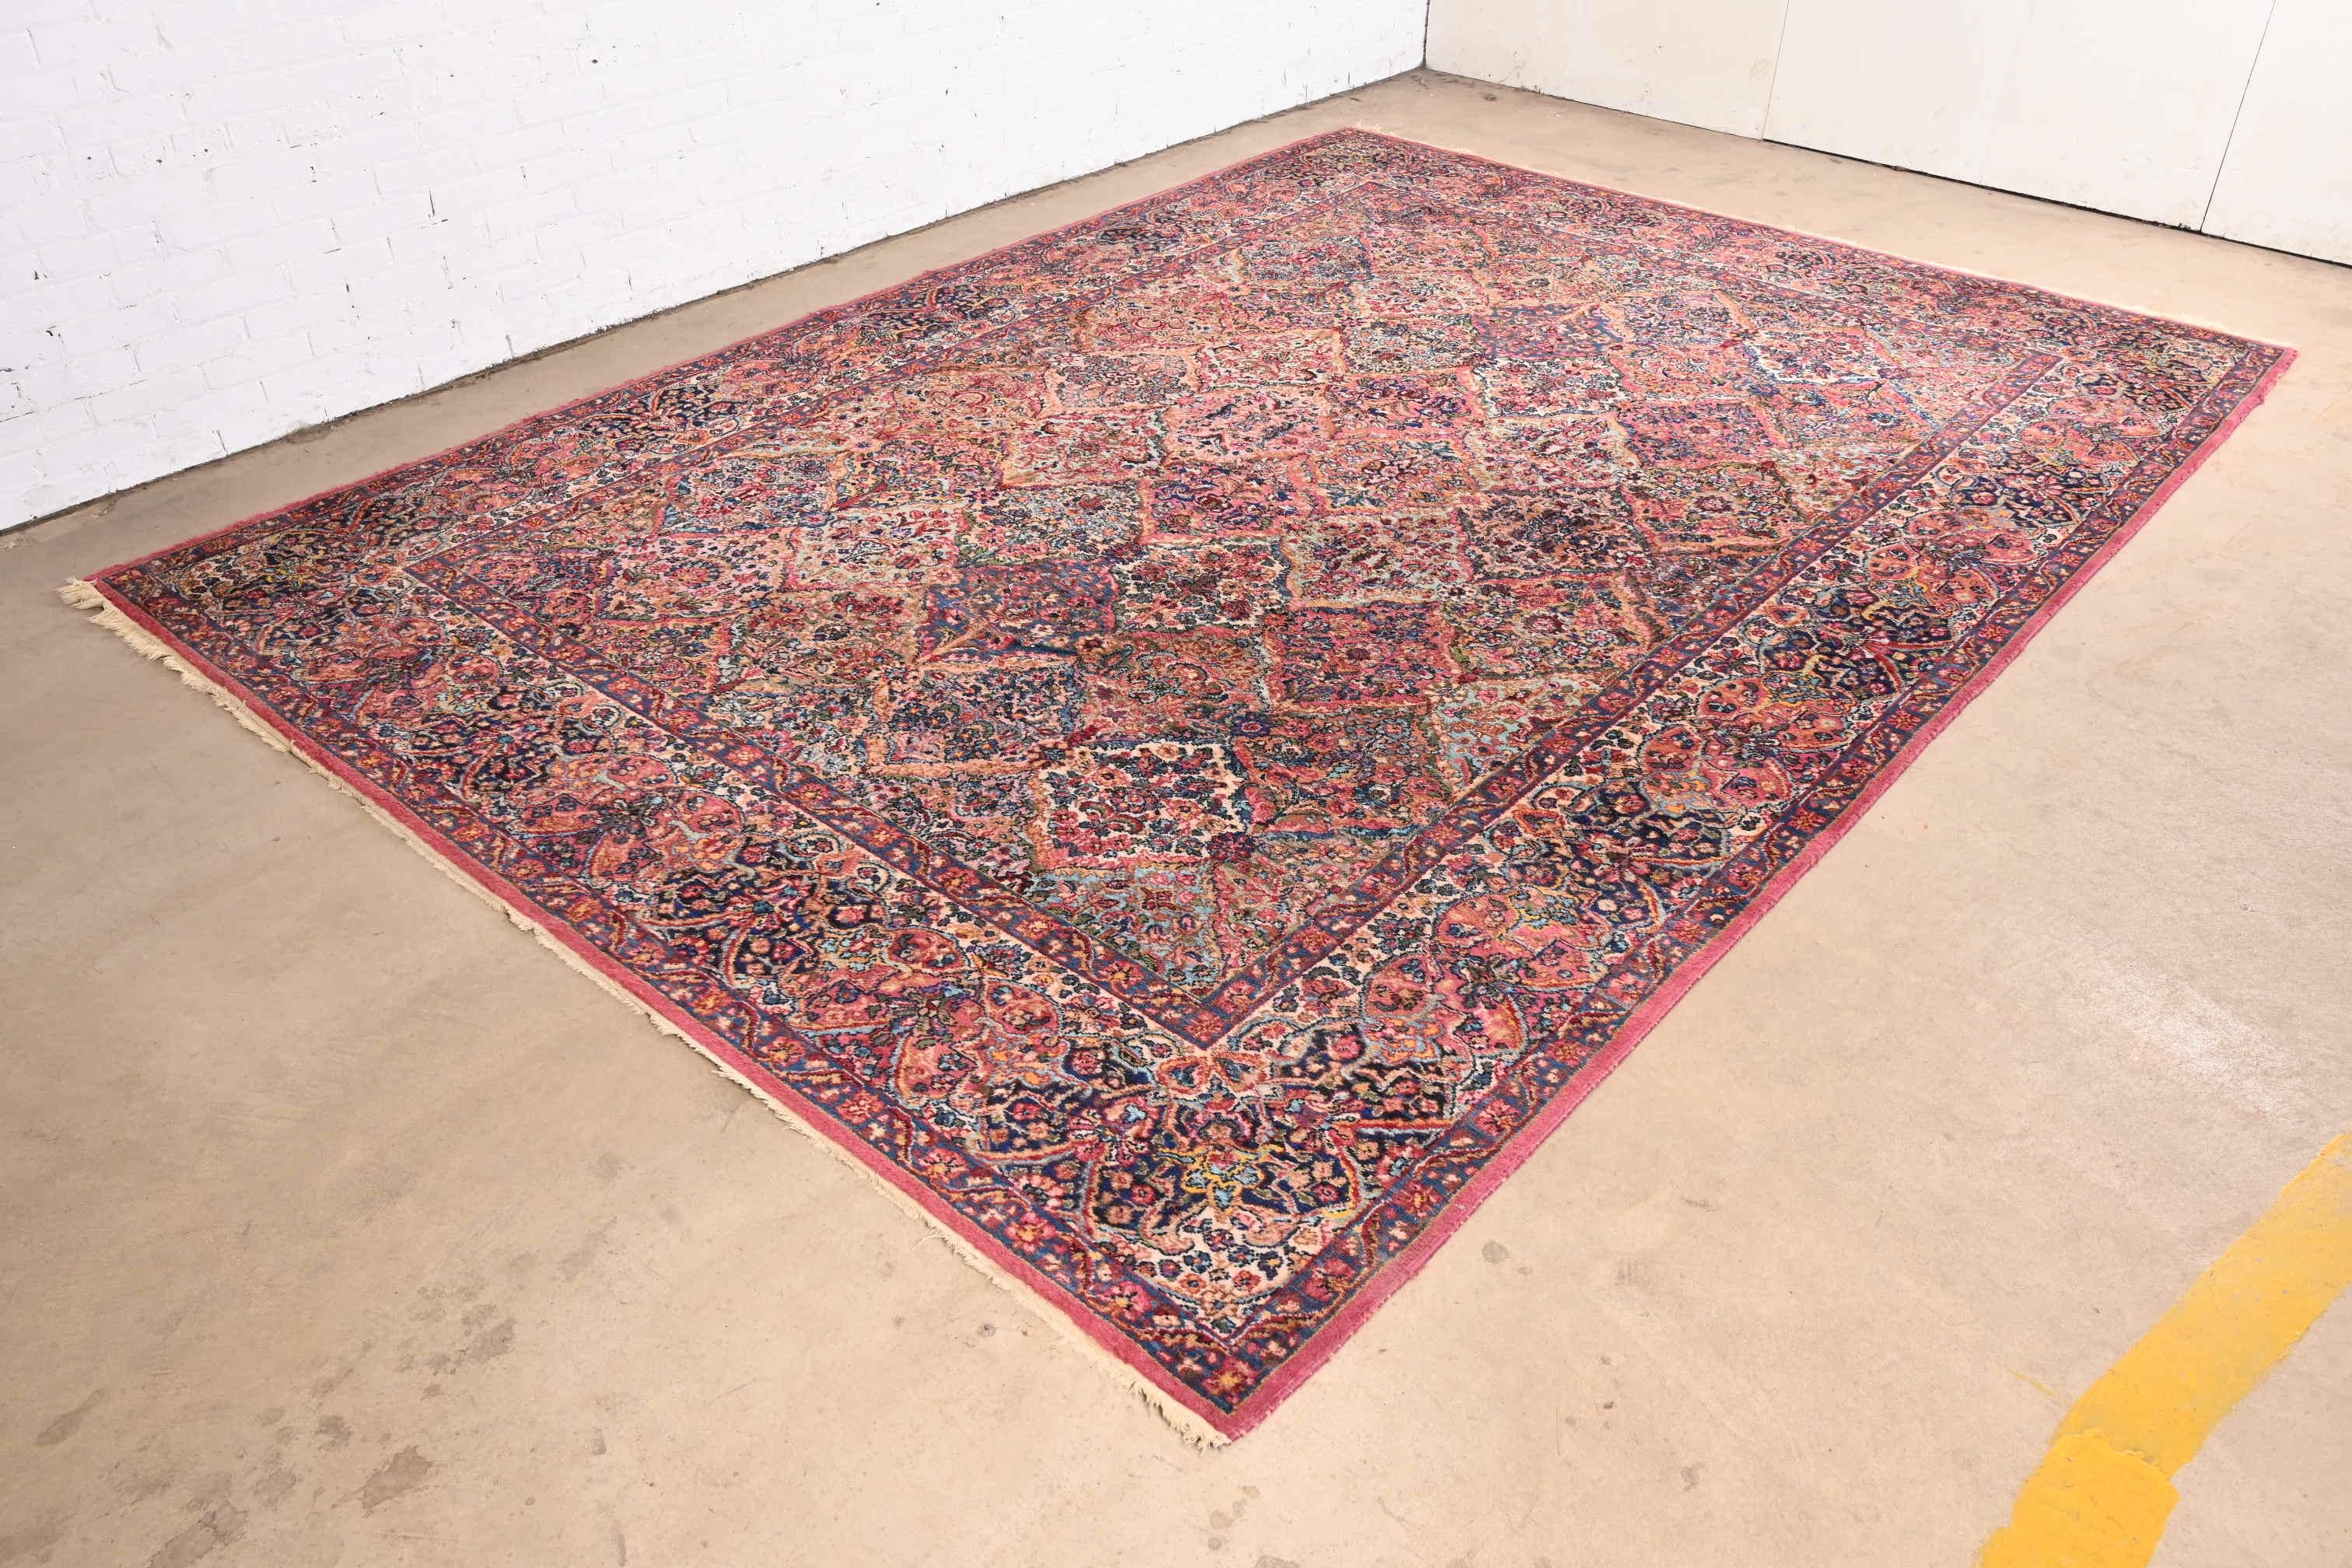 Karastan Kirman Room Size Wool Rug, circa 1940s In Good Condition For Sale In South Bend, IN